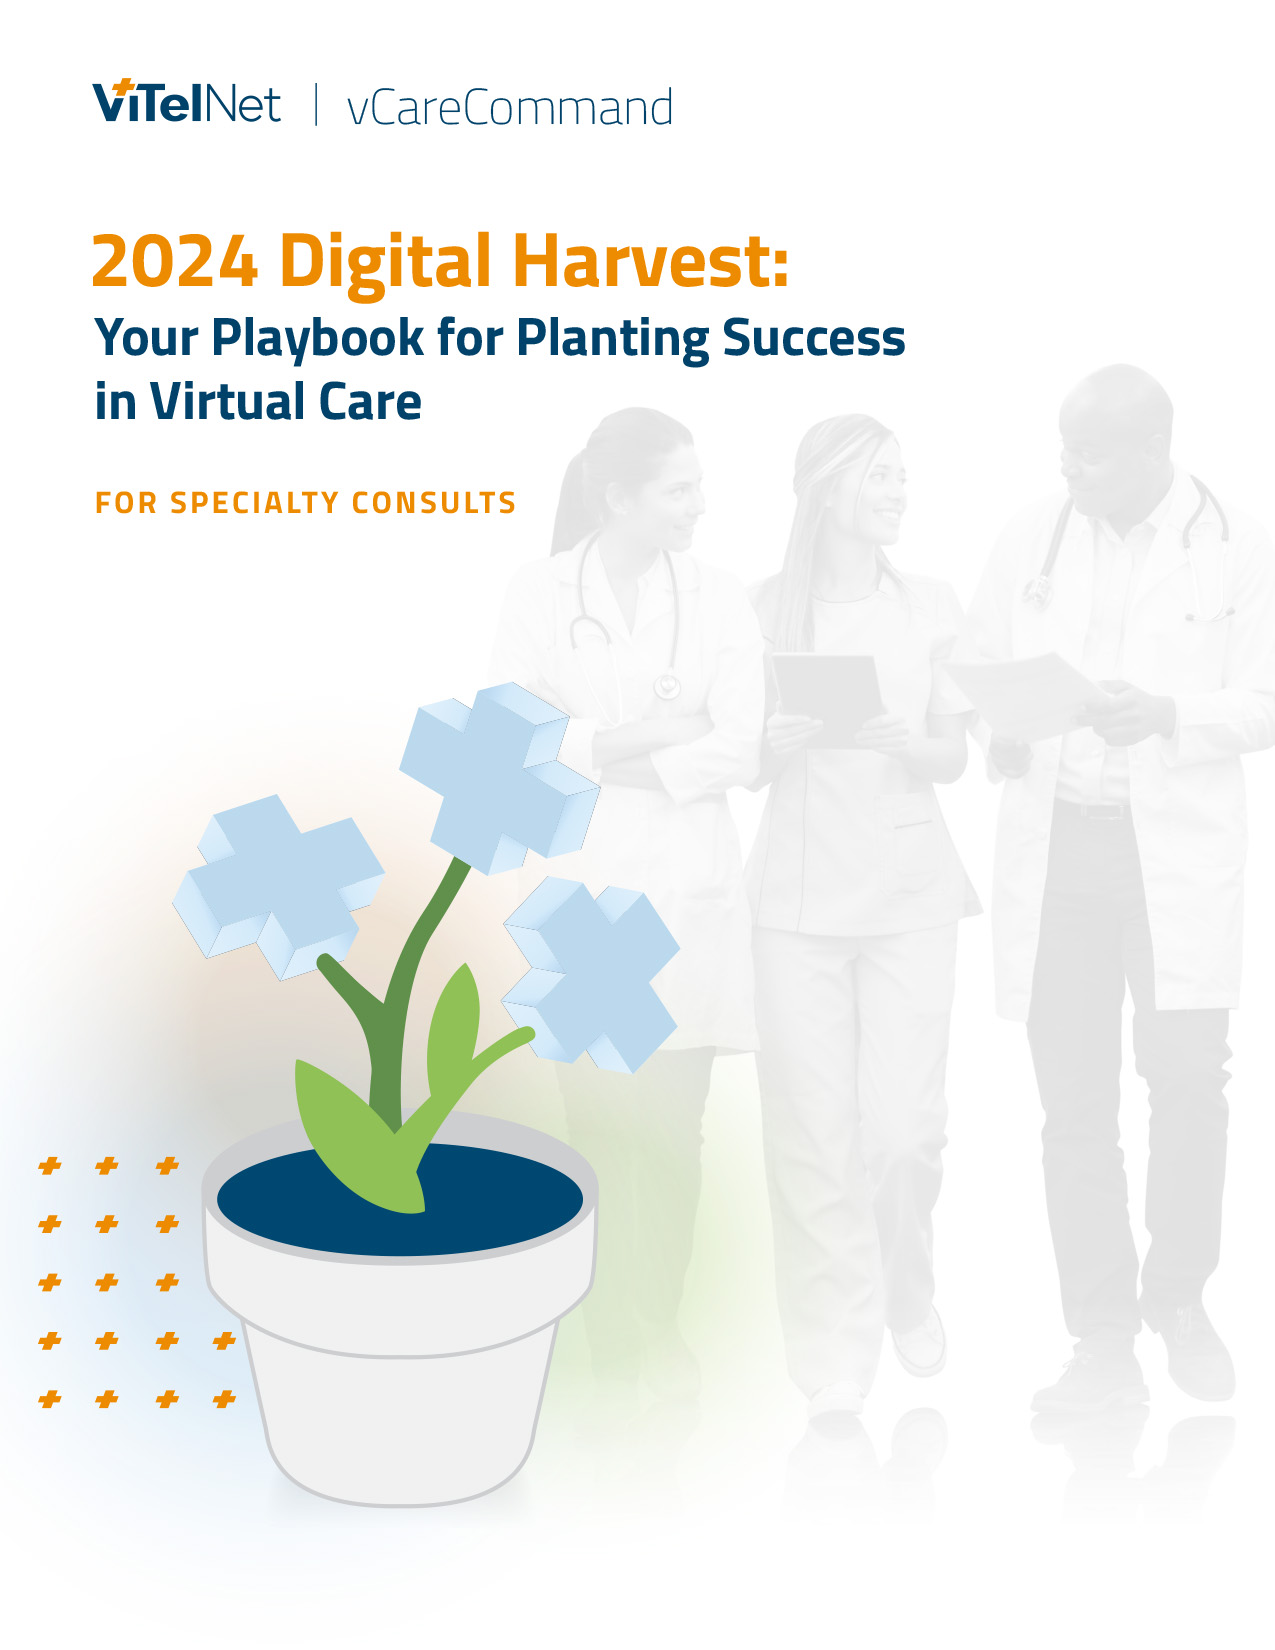 2024 Digital Harvest: Your Playbook for Planting Success in Virtual Care